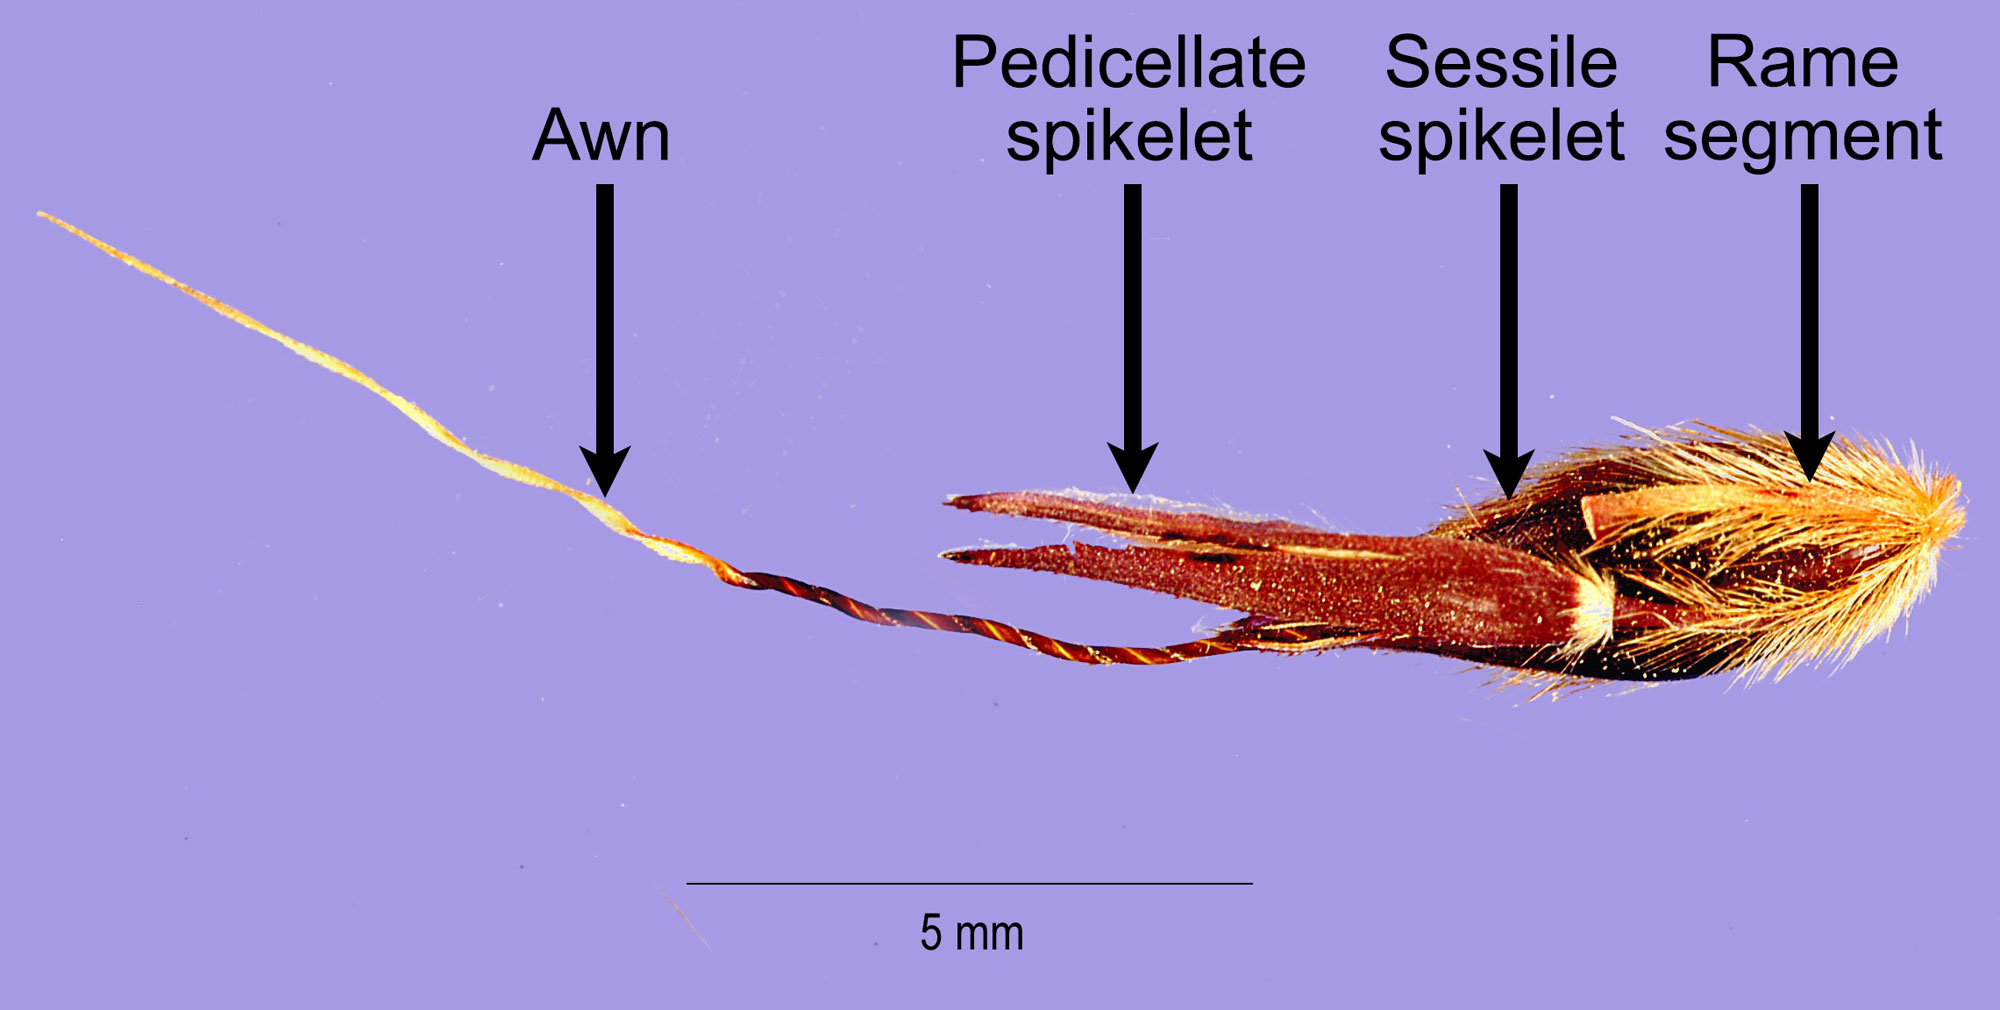 Photograph of the dispersal unit of wild sorghum. The unit consists of a sessile spikelet, a pedicellate spikelet and a rame segment attached to one another. A long, twisted awn sticks out of the tip of the sessile spikelet.